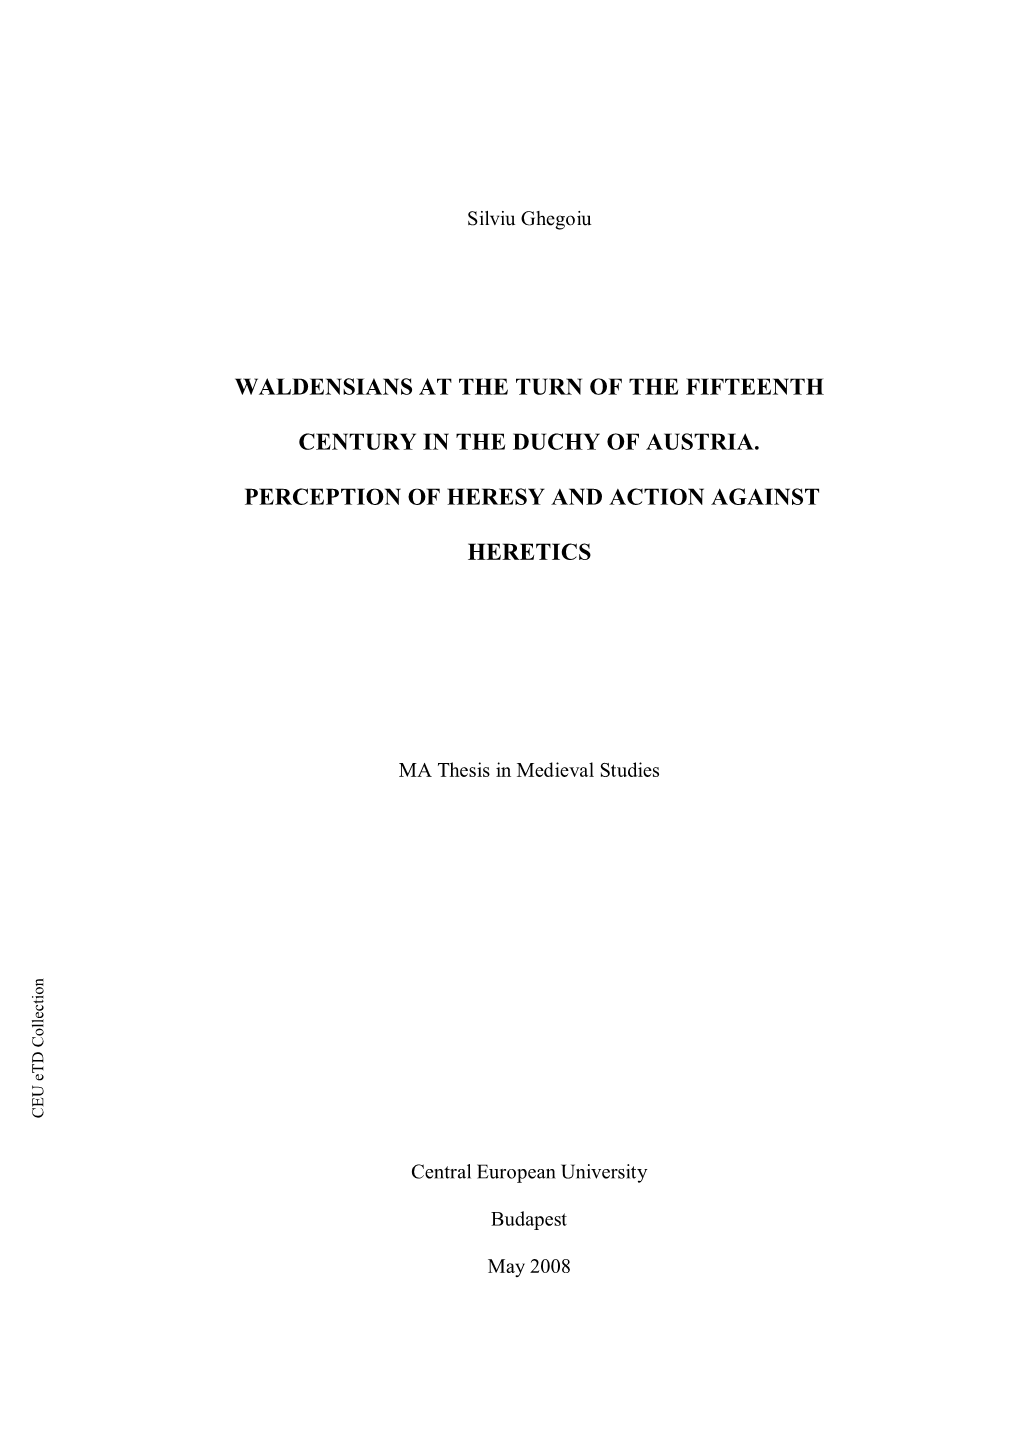 Waldensians at the Turn of the Fifteenth Century In